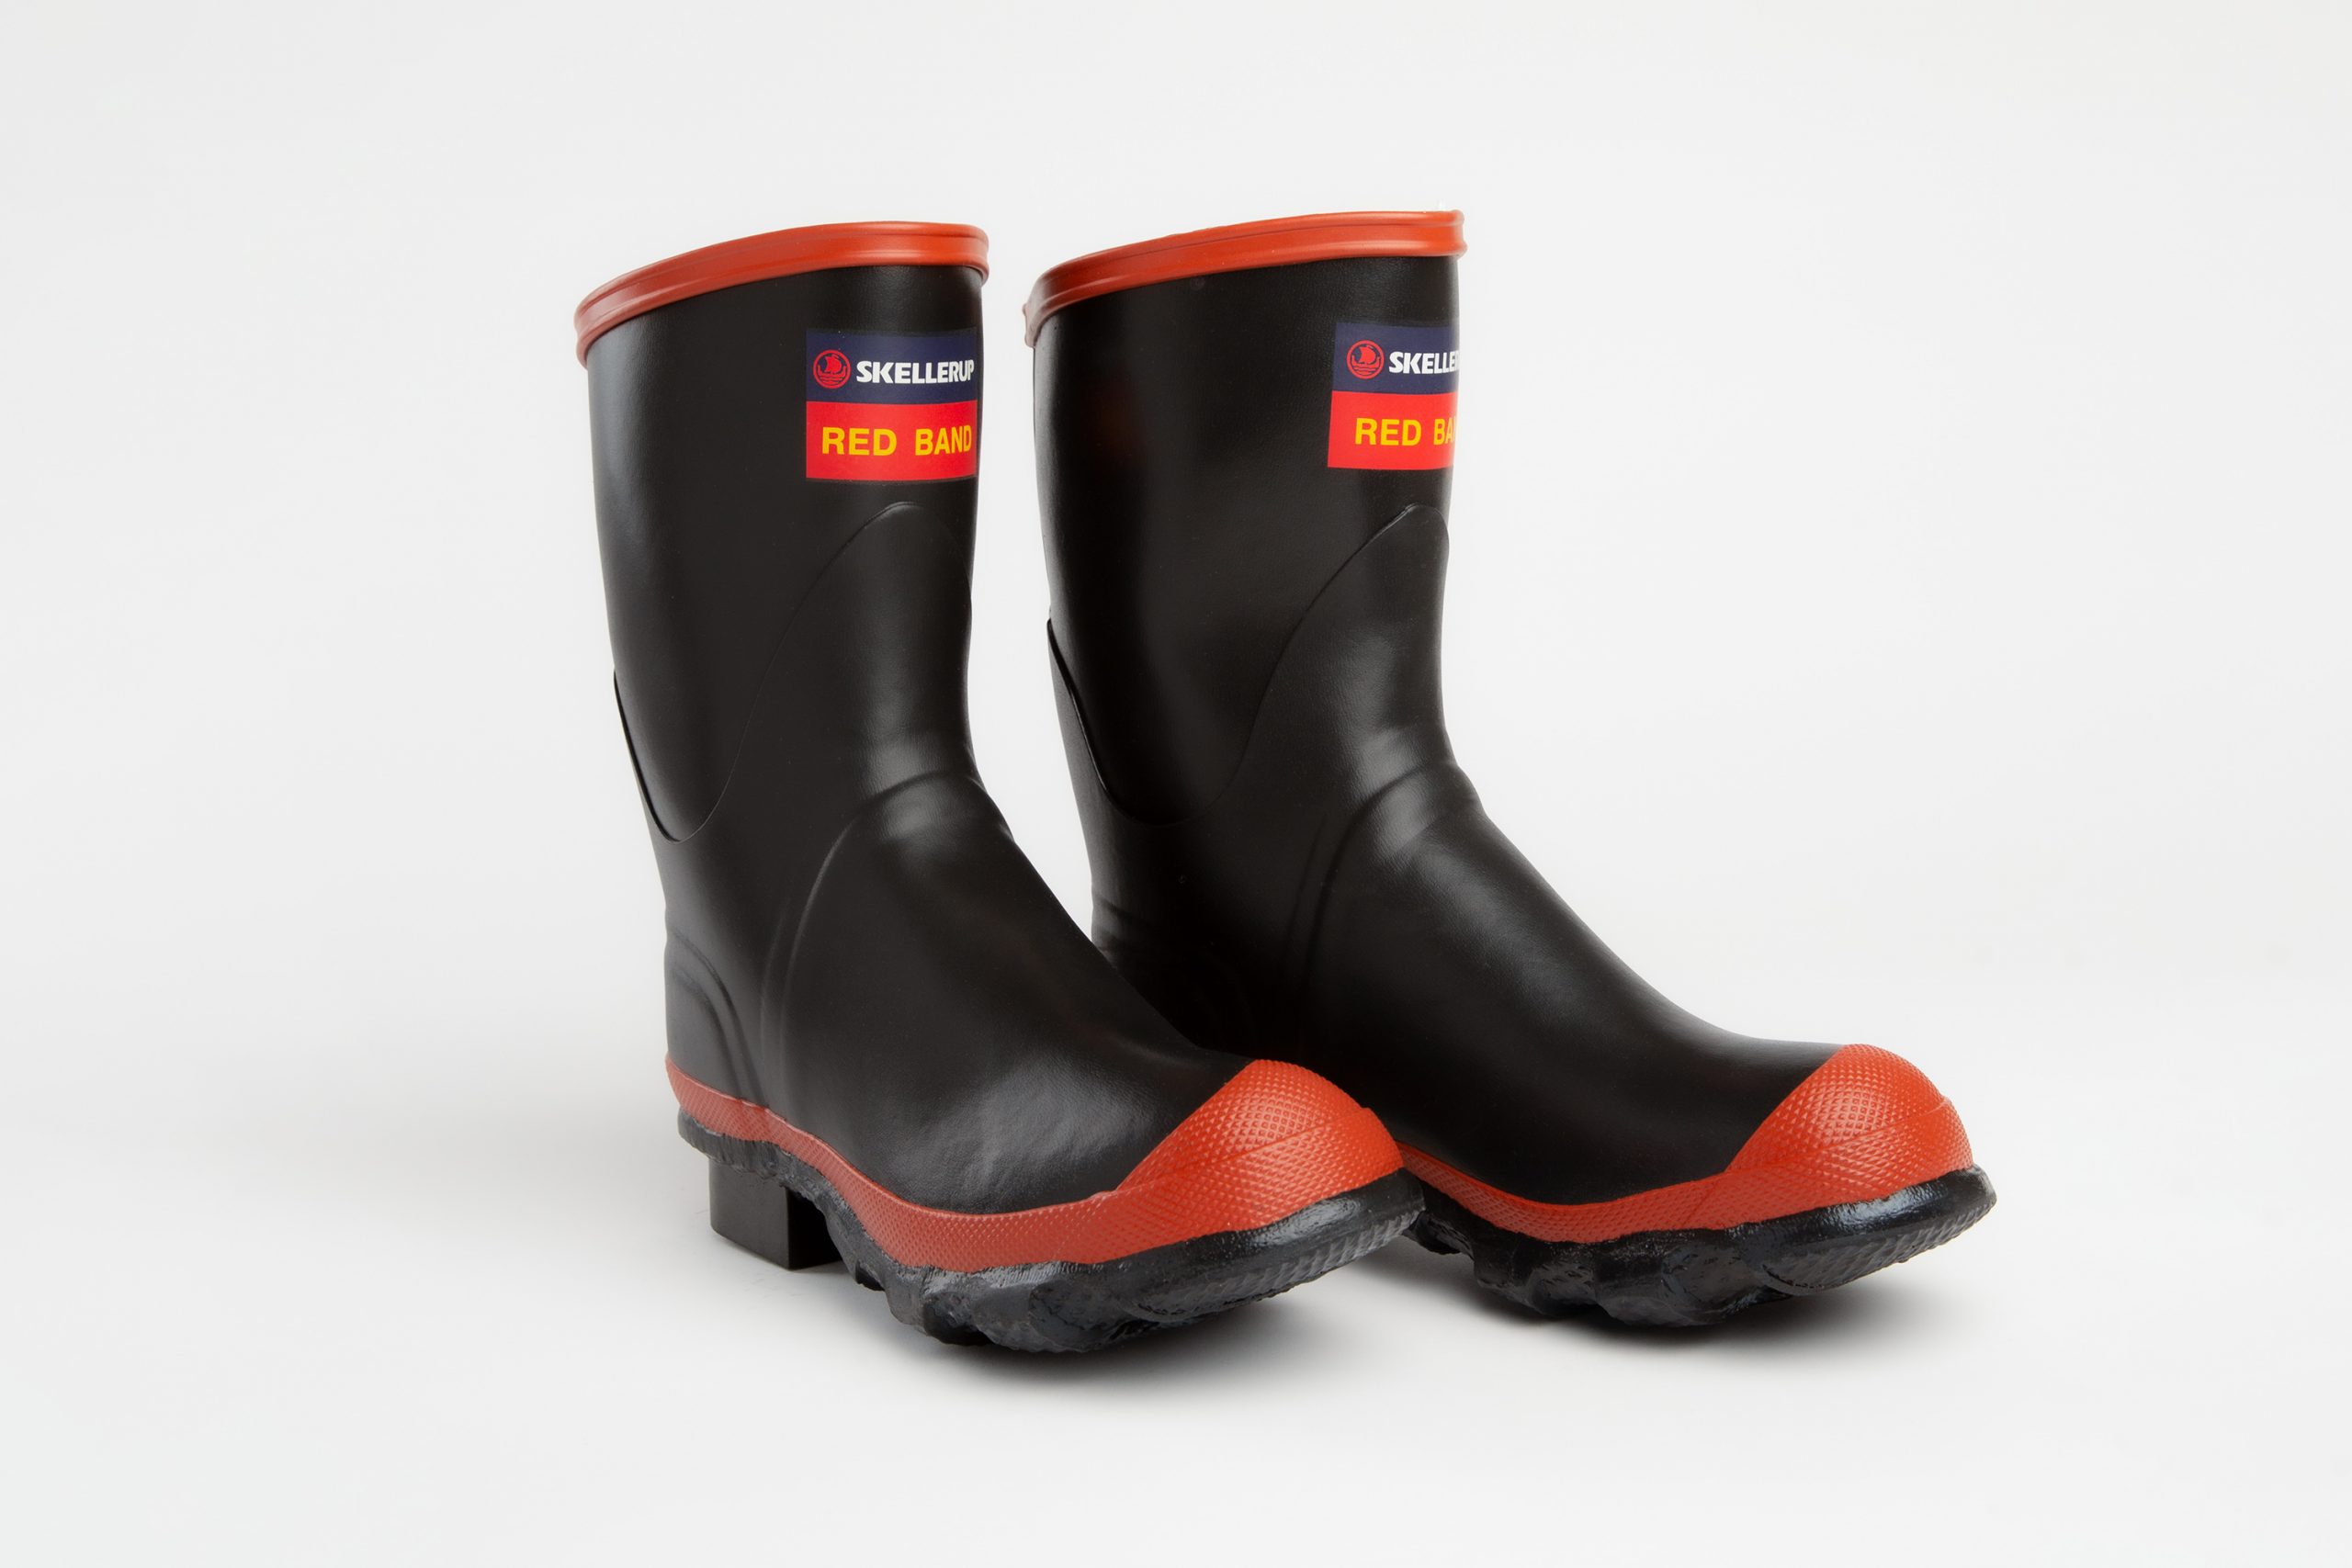 product-skellerup-gumboots-red-band